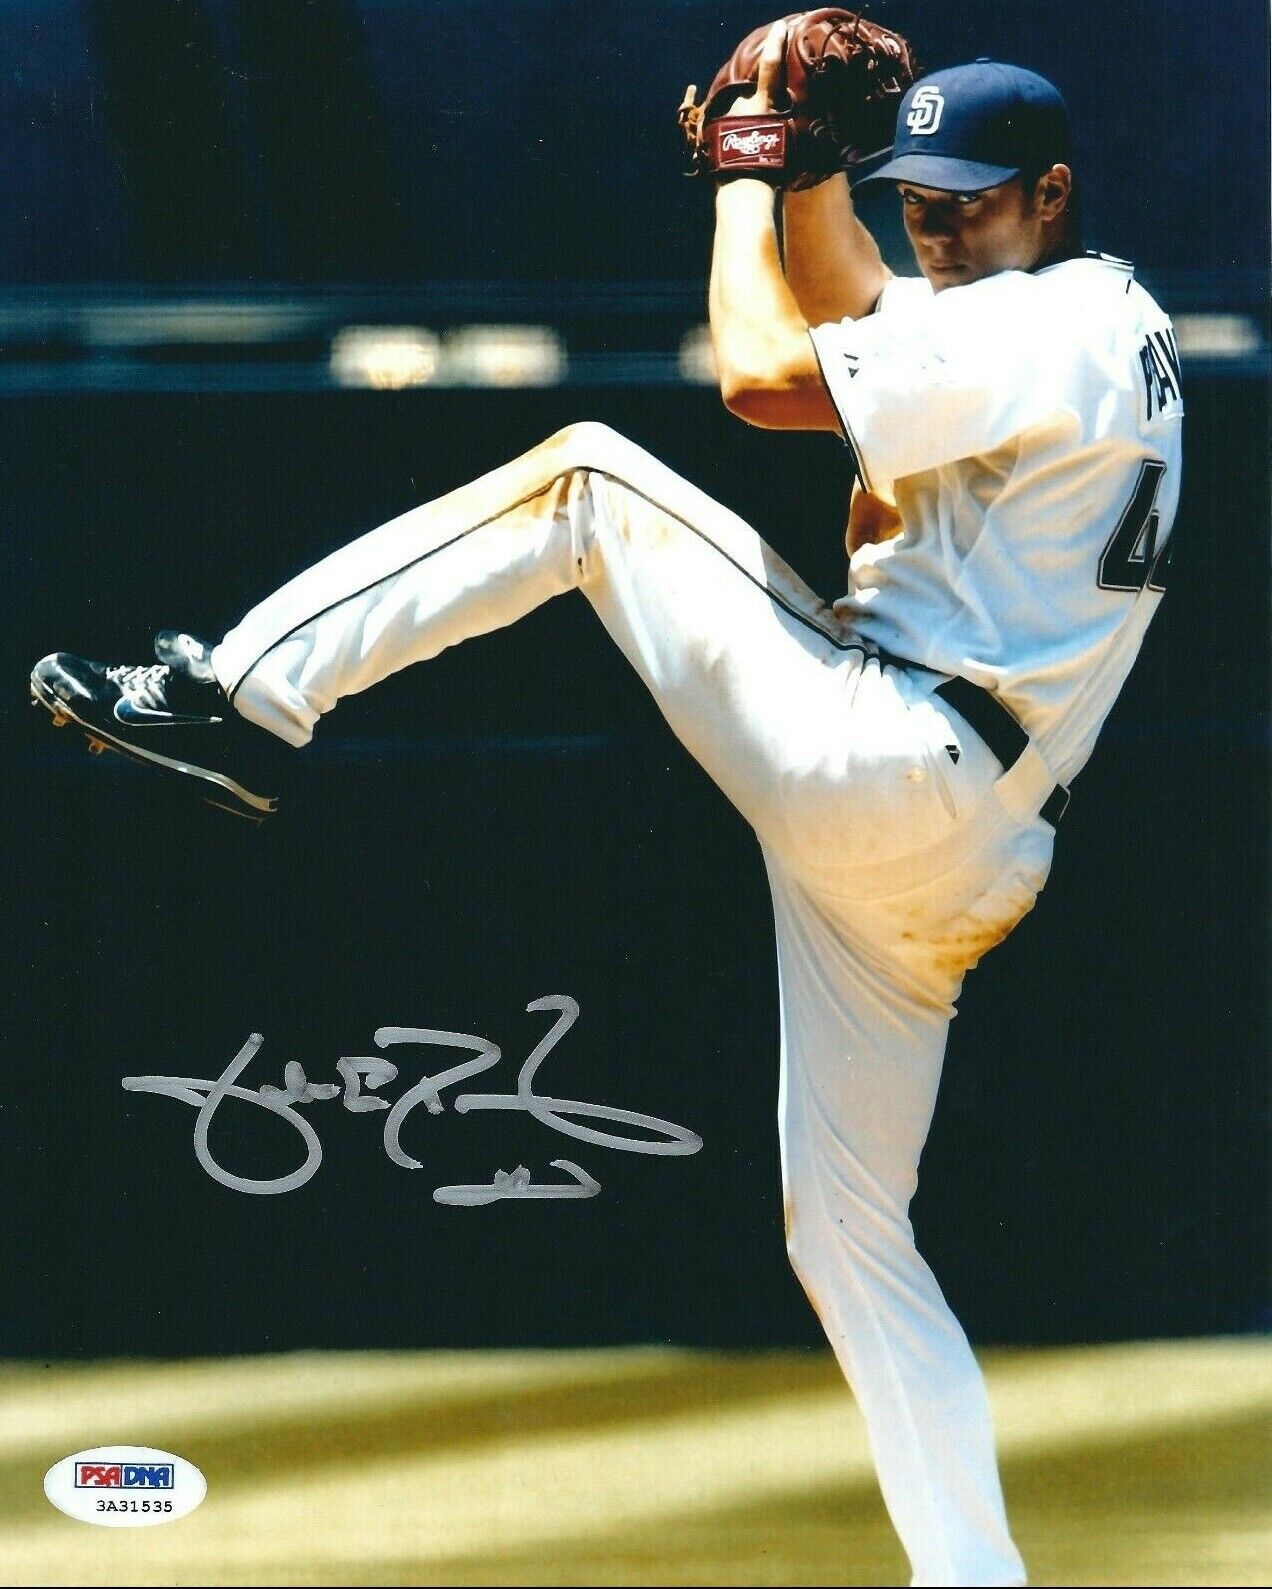 Jake Peavy Signed San Diego Padres 8x10 Photo Poster painting PSA 3A31535